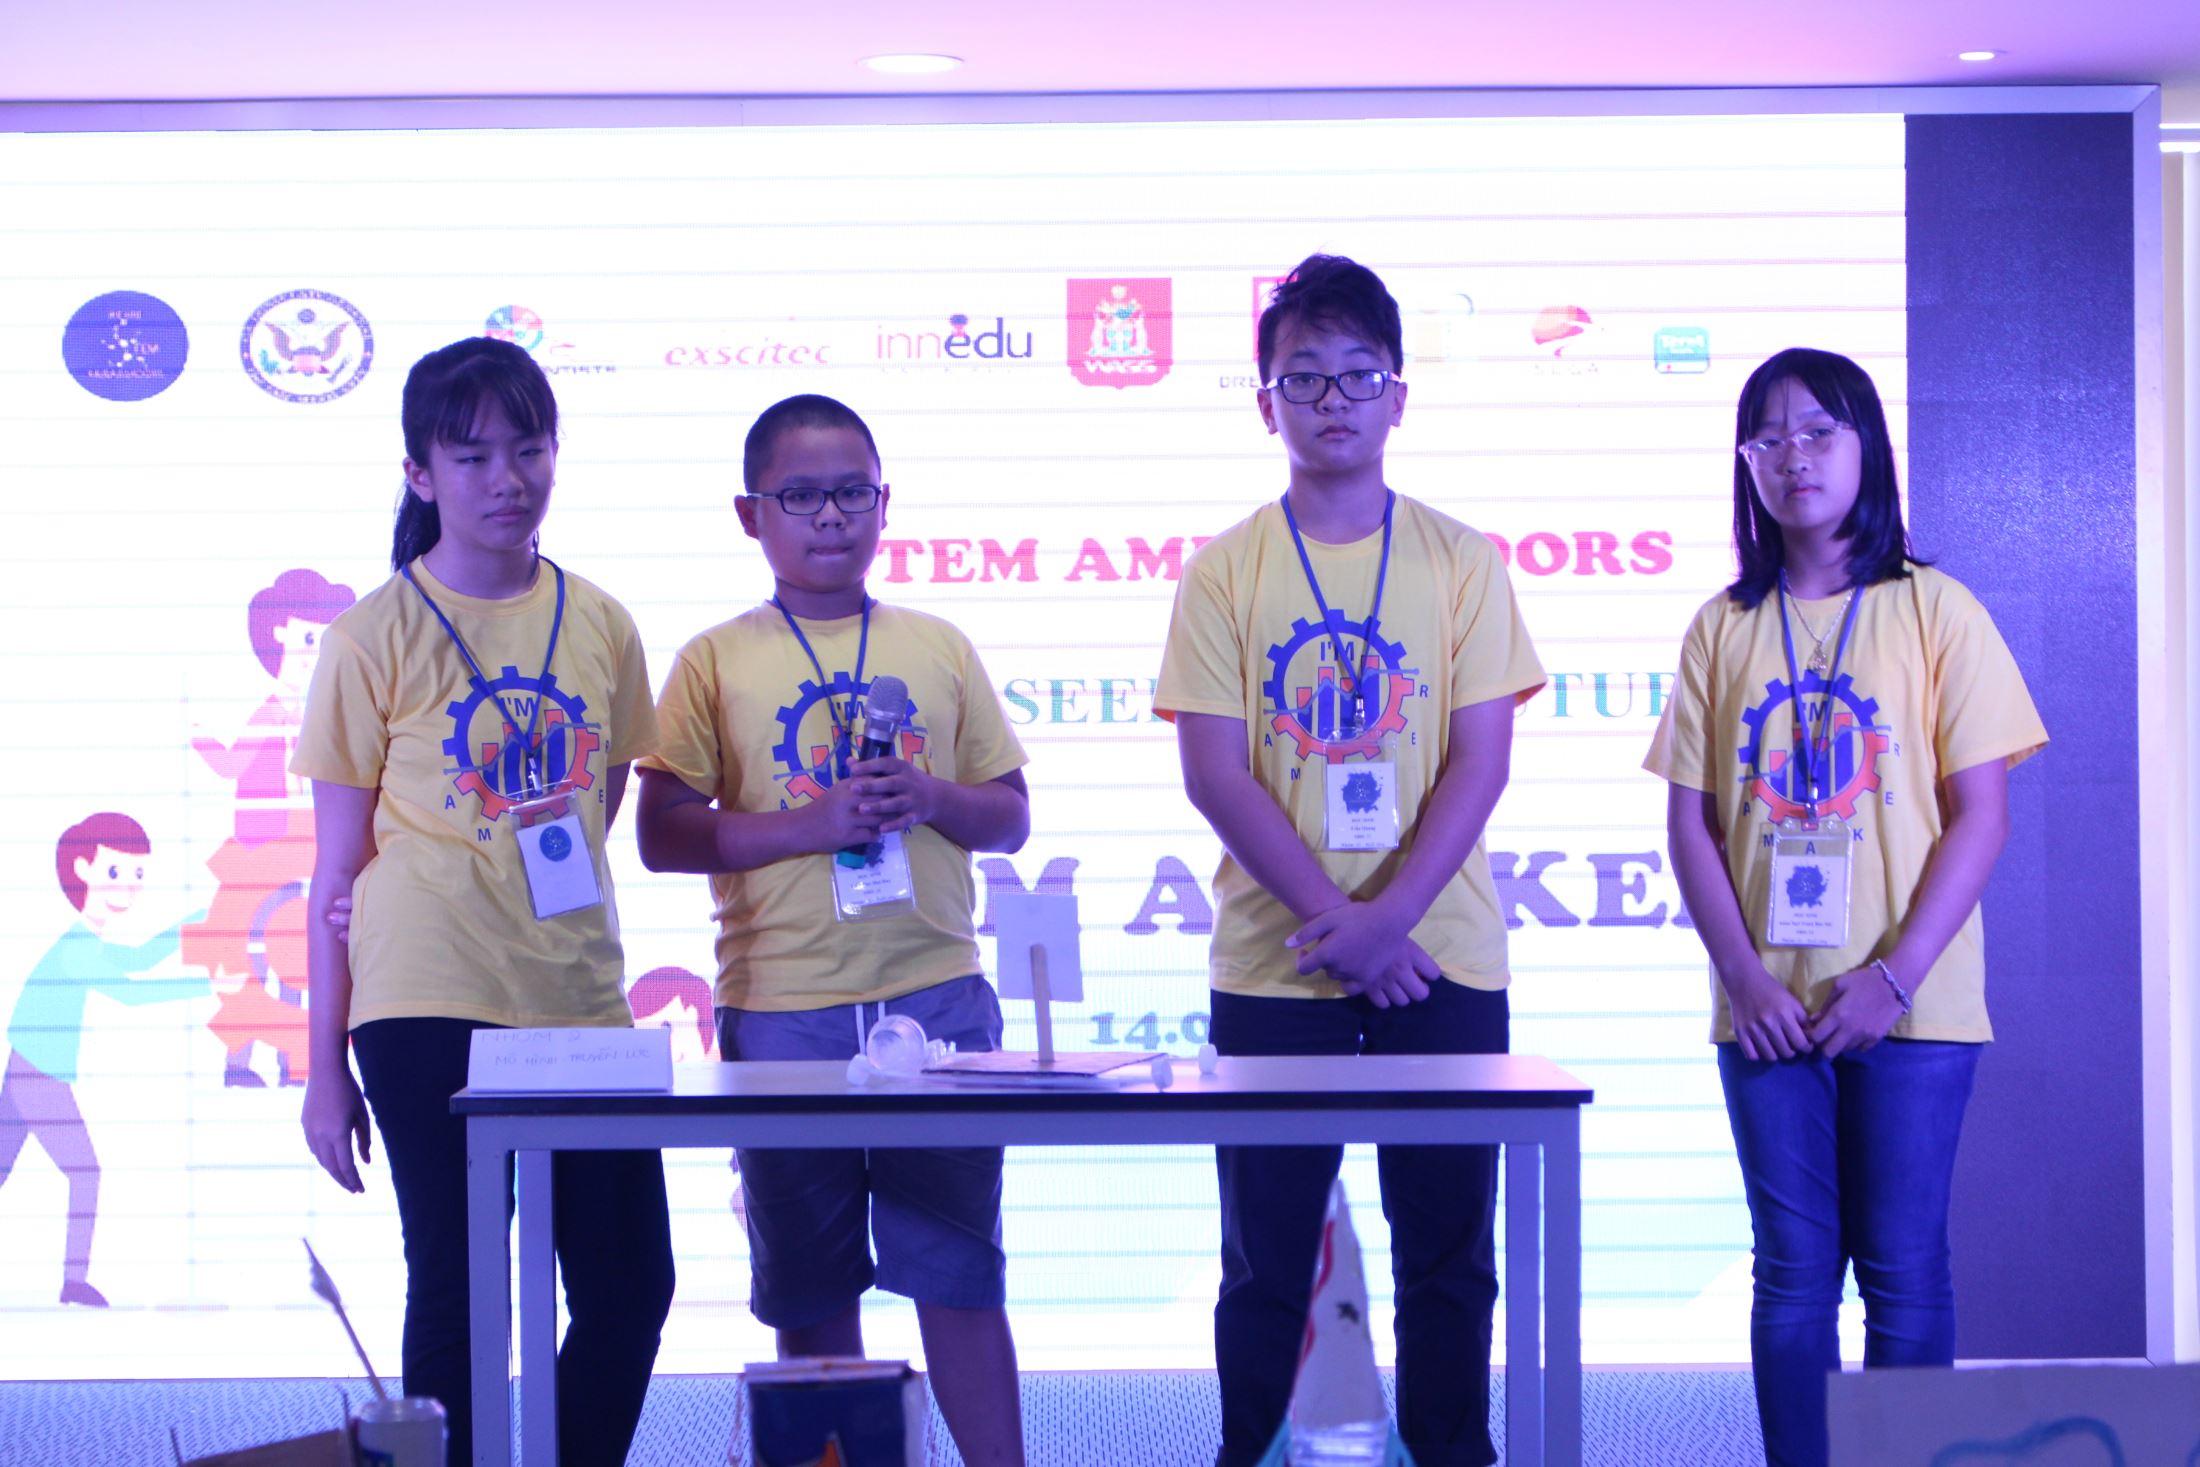 Anna Ngo Trinh Bao Nhi – grade 7 (the 1st from right) listened to comments of the Organizers about her team’s performance.